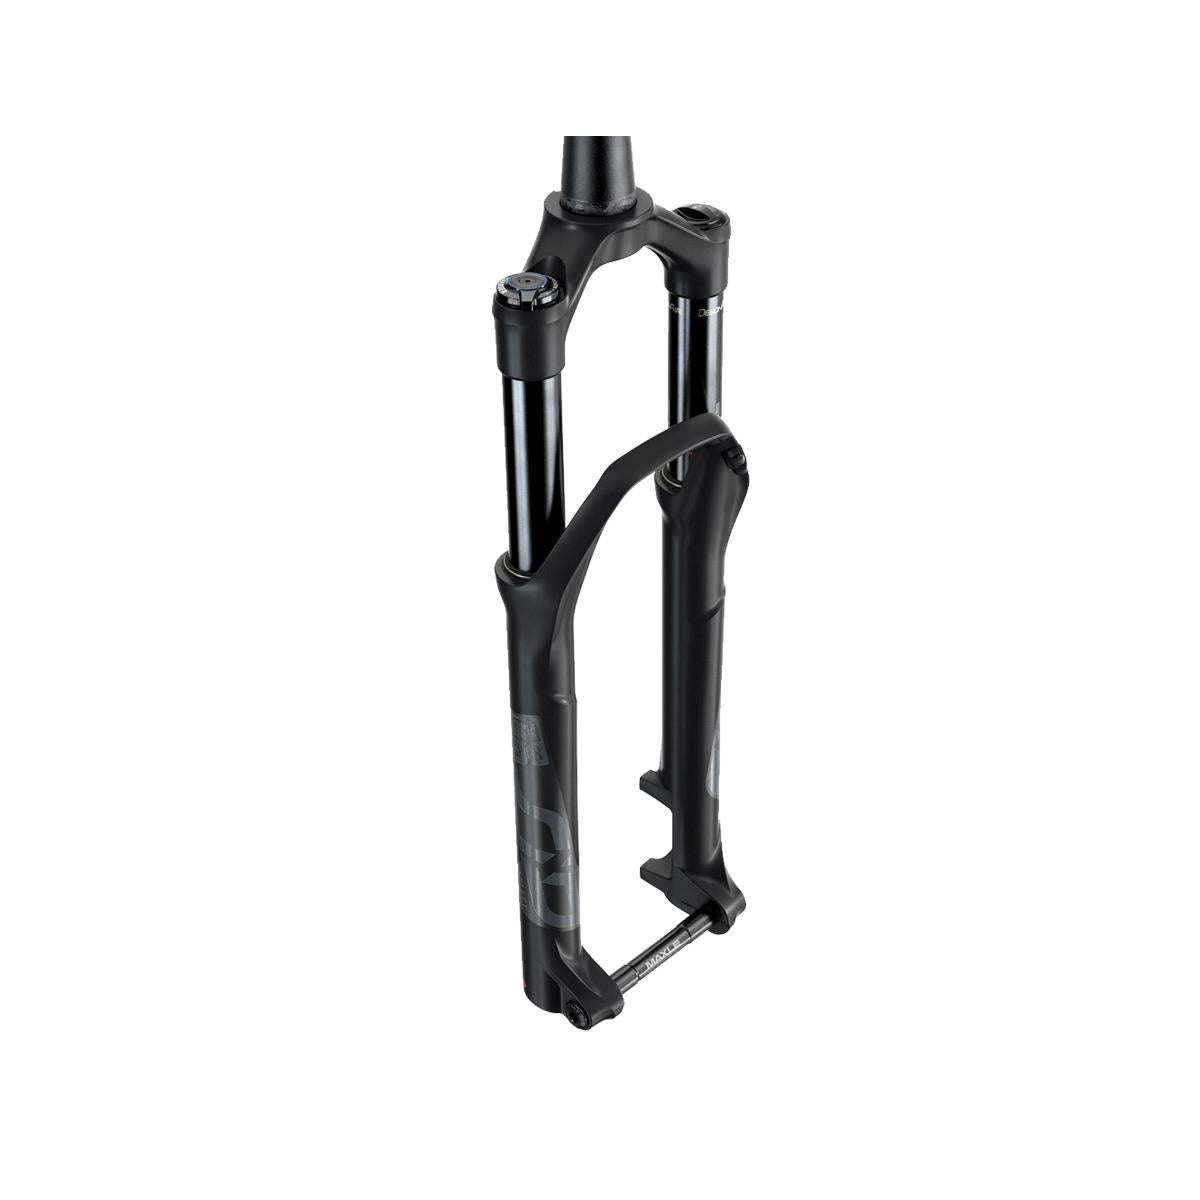 ROCKSHOX Fork Sid Select Charger Rl - Remote 27.5" Boost 15X110